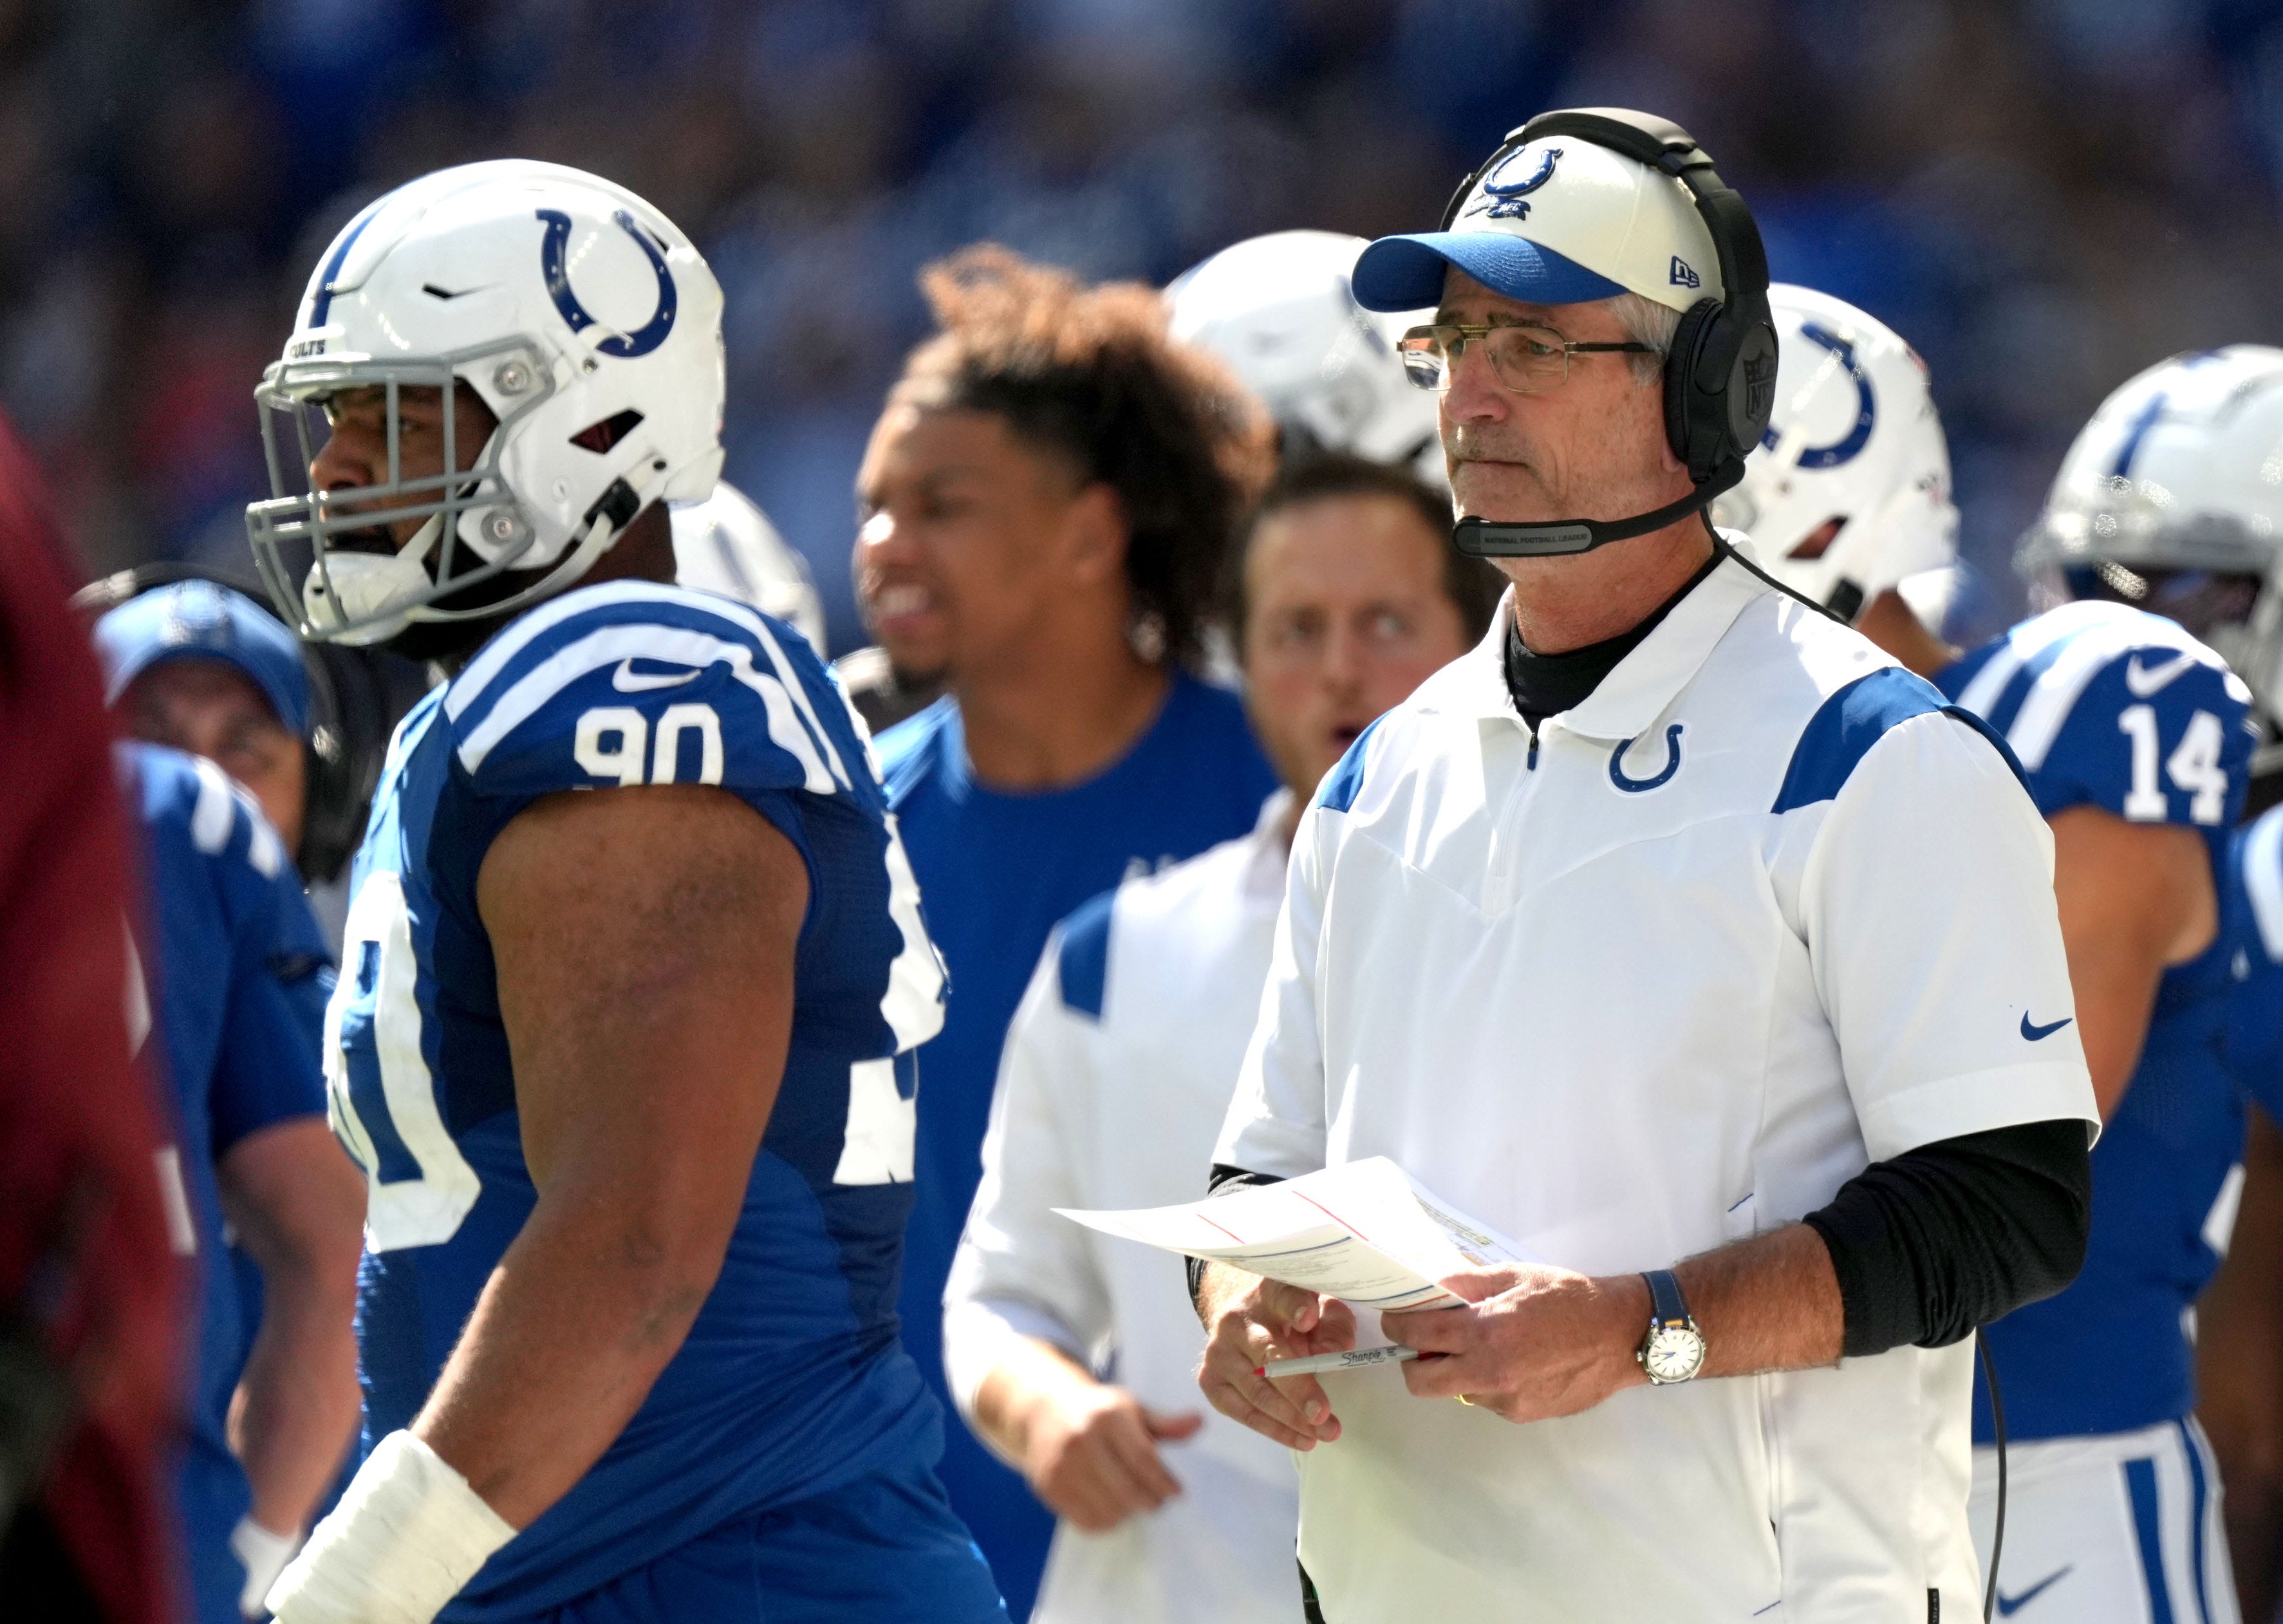 Indianapolis Colts head coach Frank Reich was part of the group of white coaches who addressed the NFL owners at this year’s annual league meeting, advocating for Black coaches on their staffs.